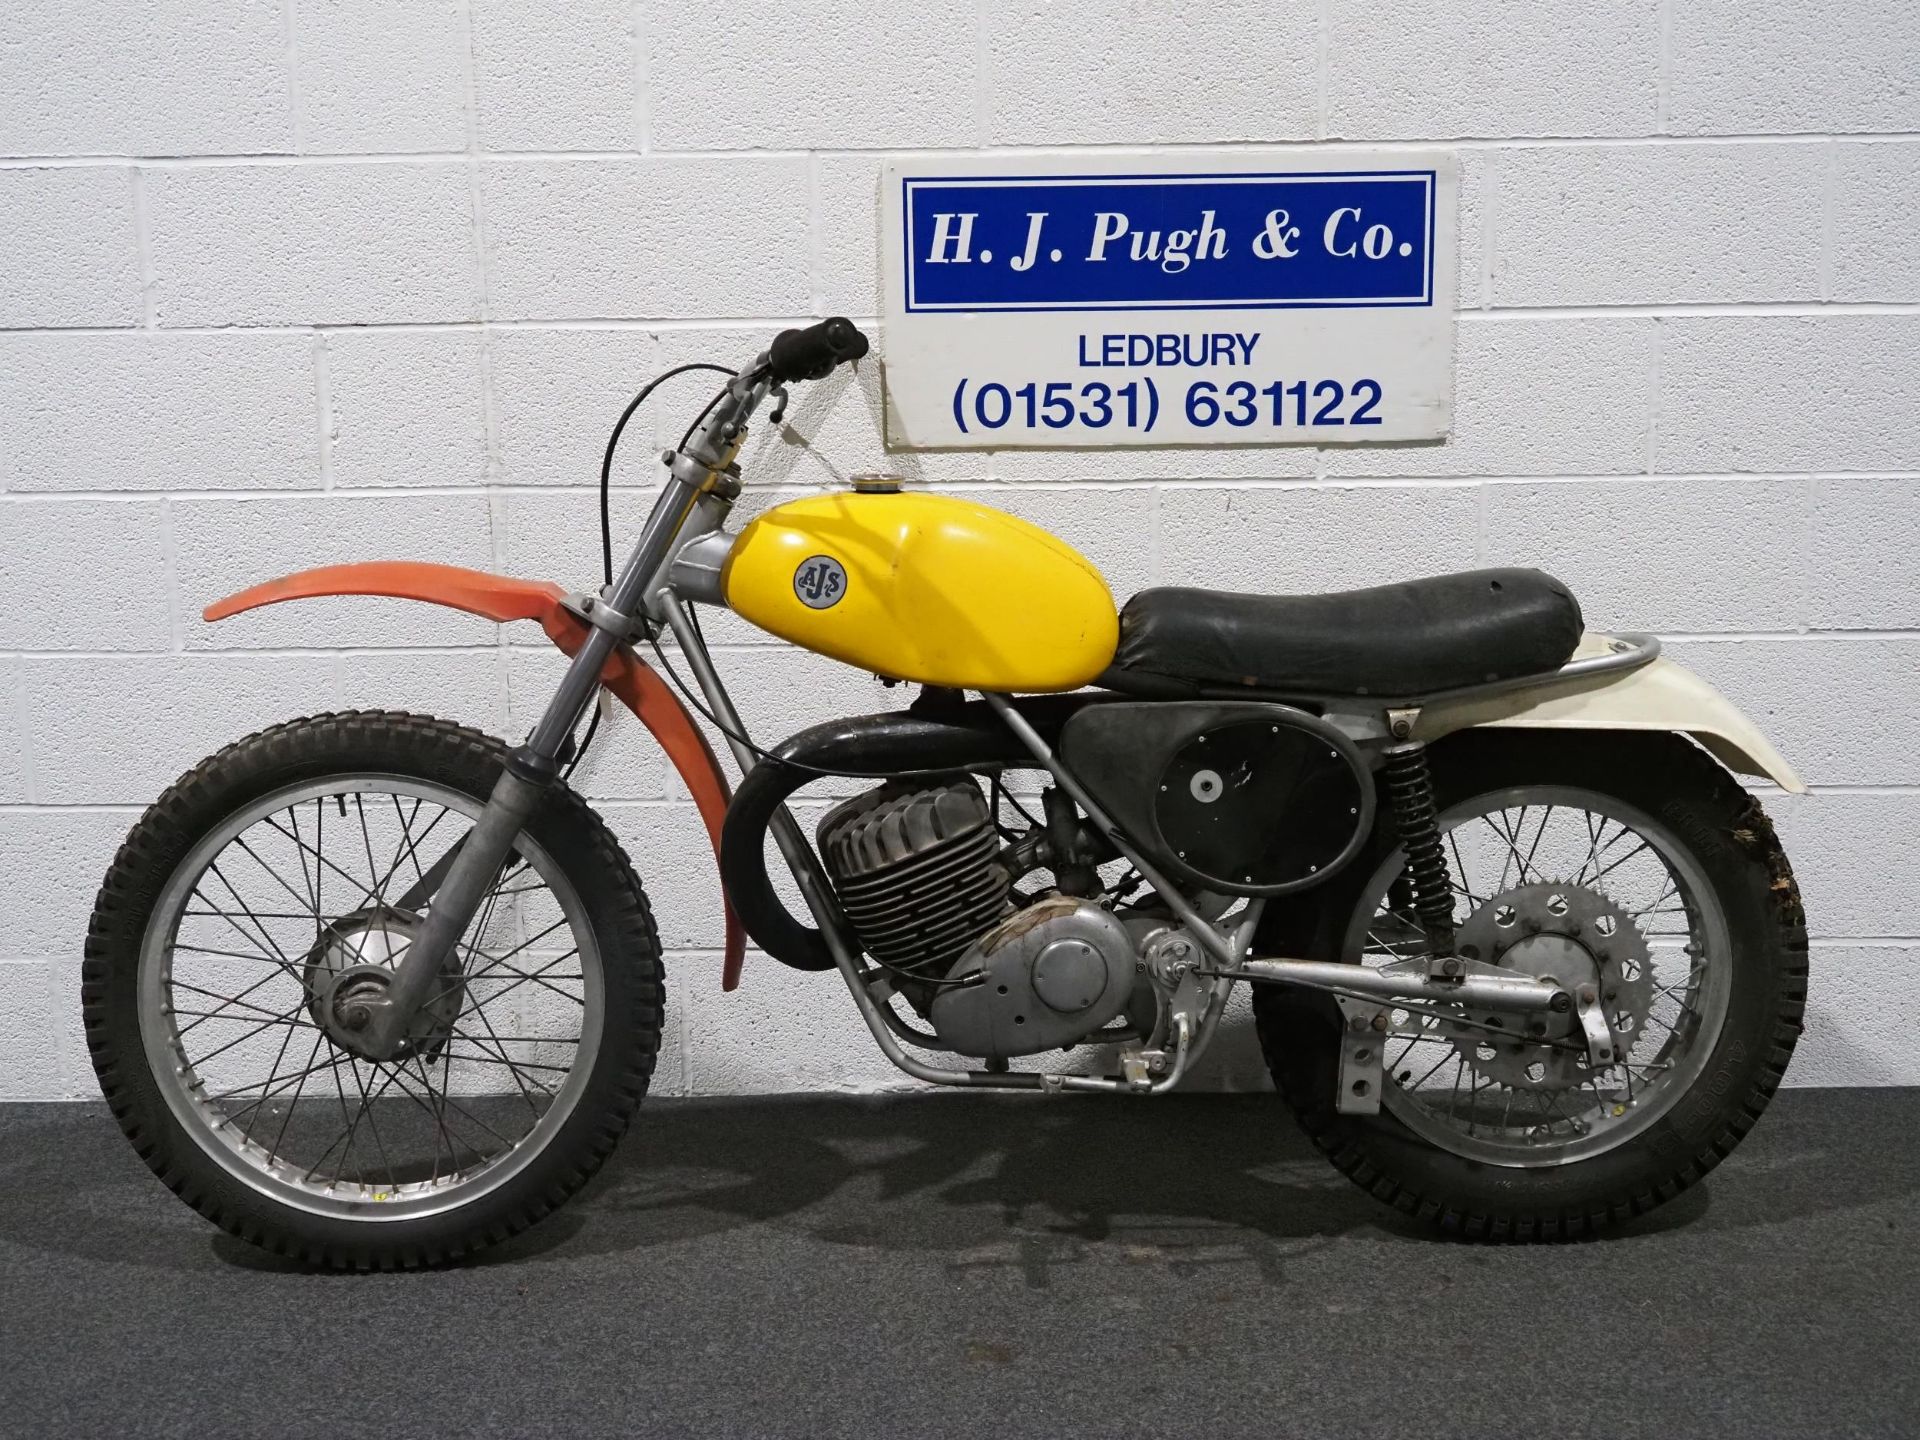 AJS Stormer motorcycle, 1970's, 250cc. Frame no. 0700349/713 Engine turns over. No docs - Image 4 of 4